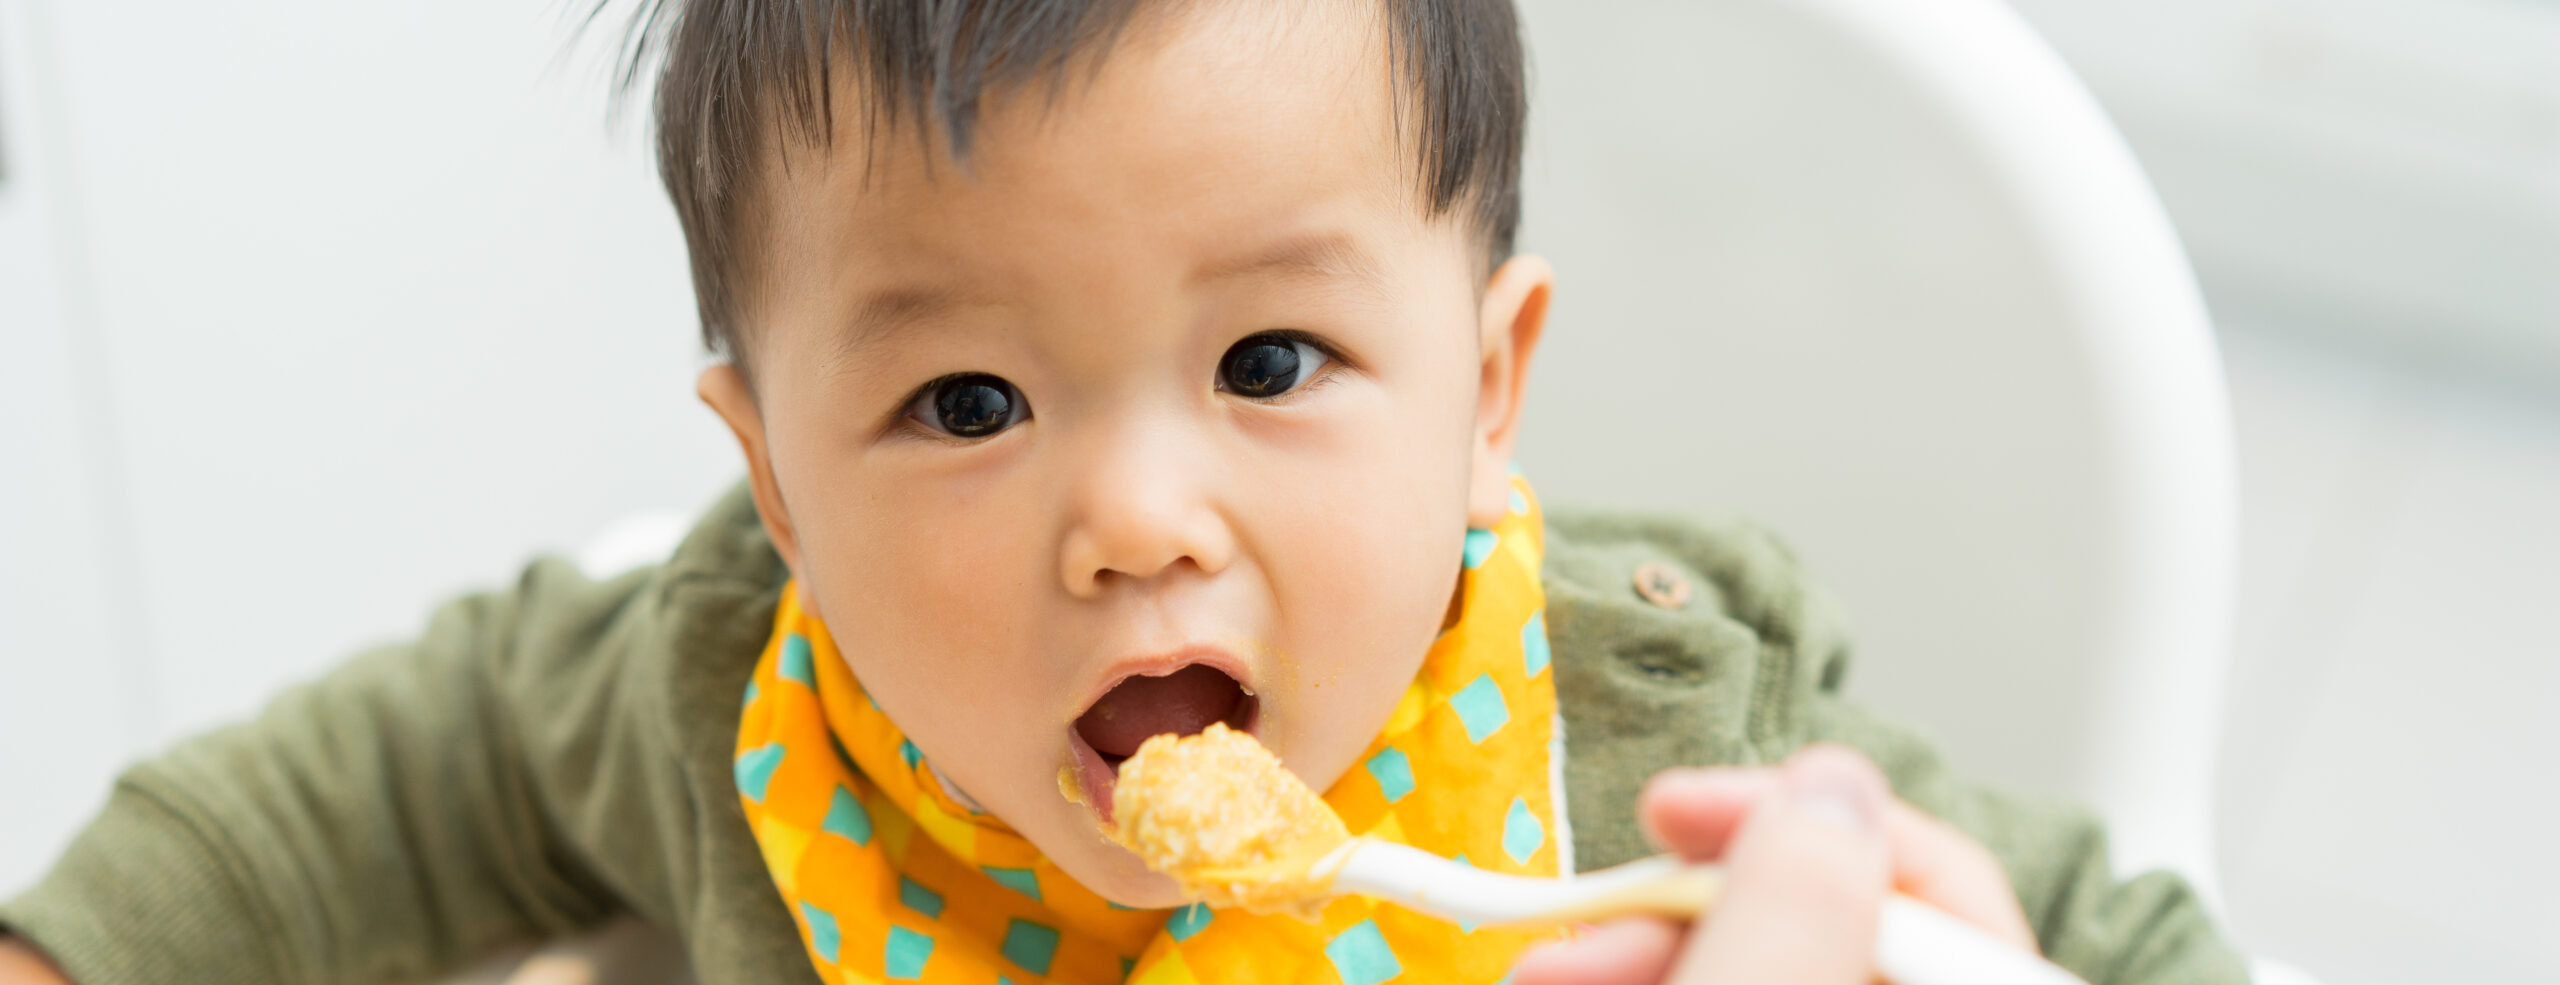 Child being fed with porridge as an image for child nutrition